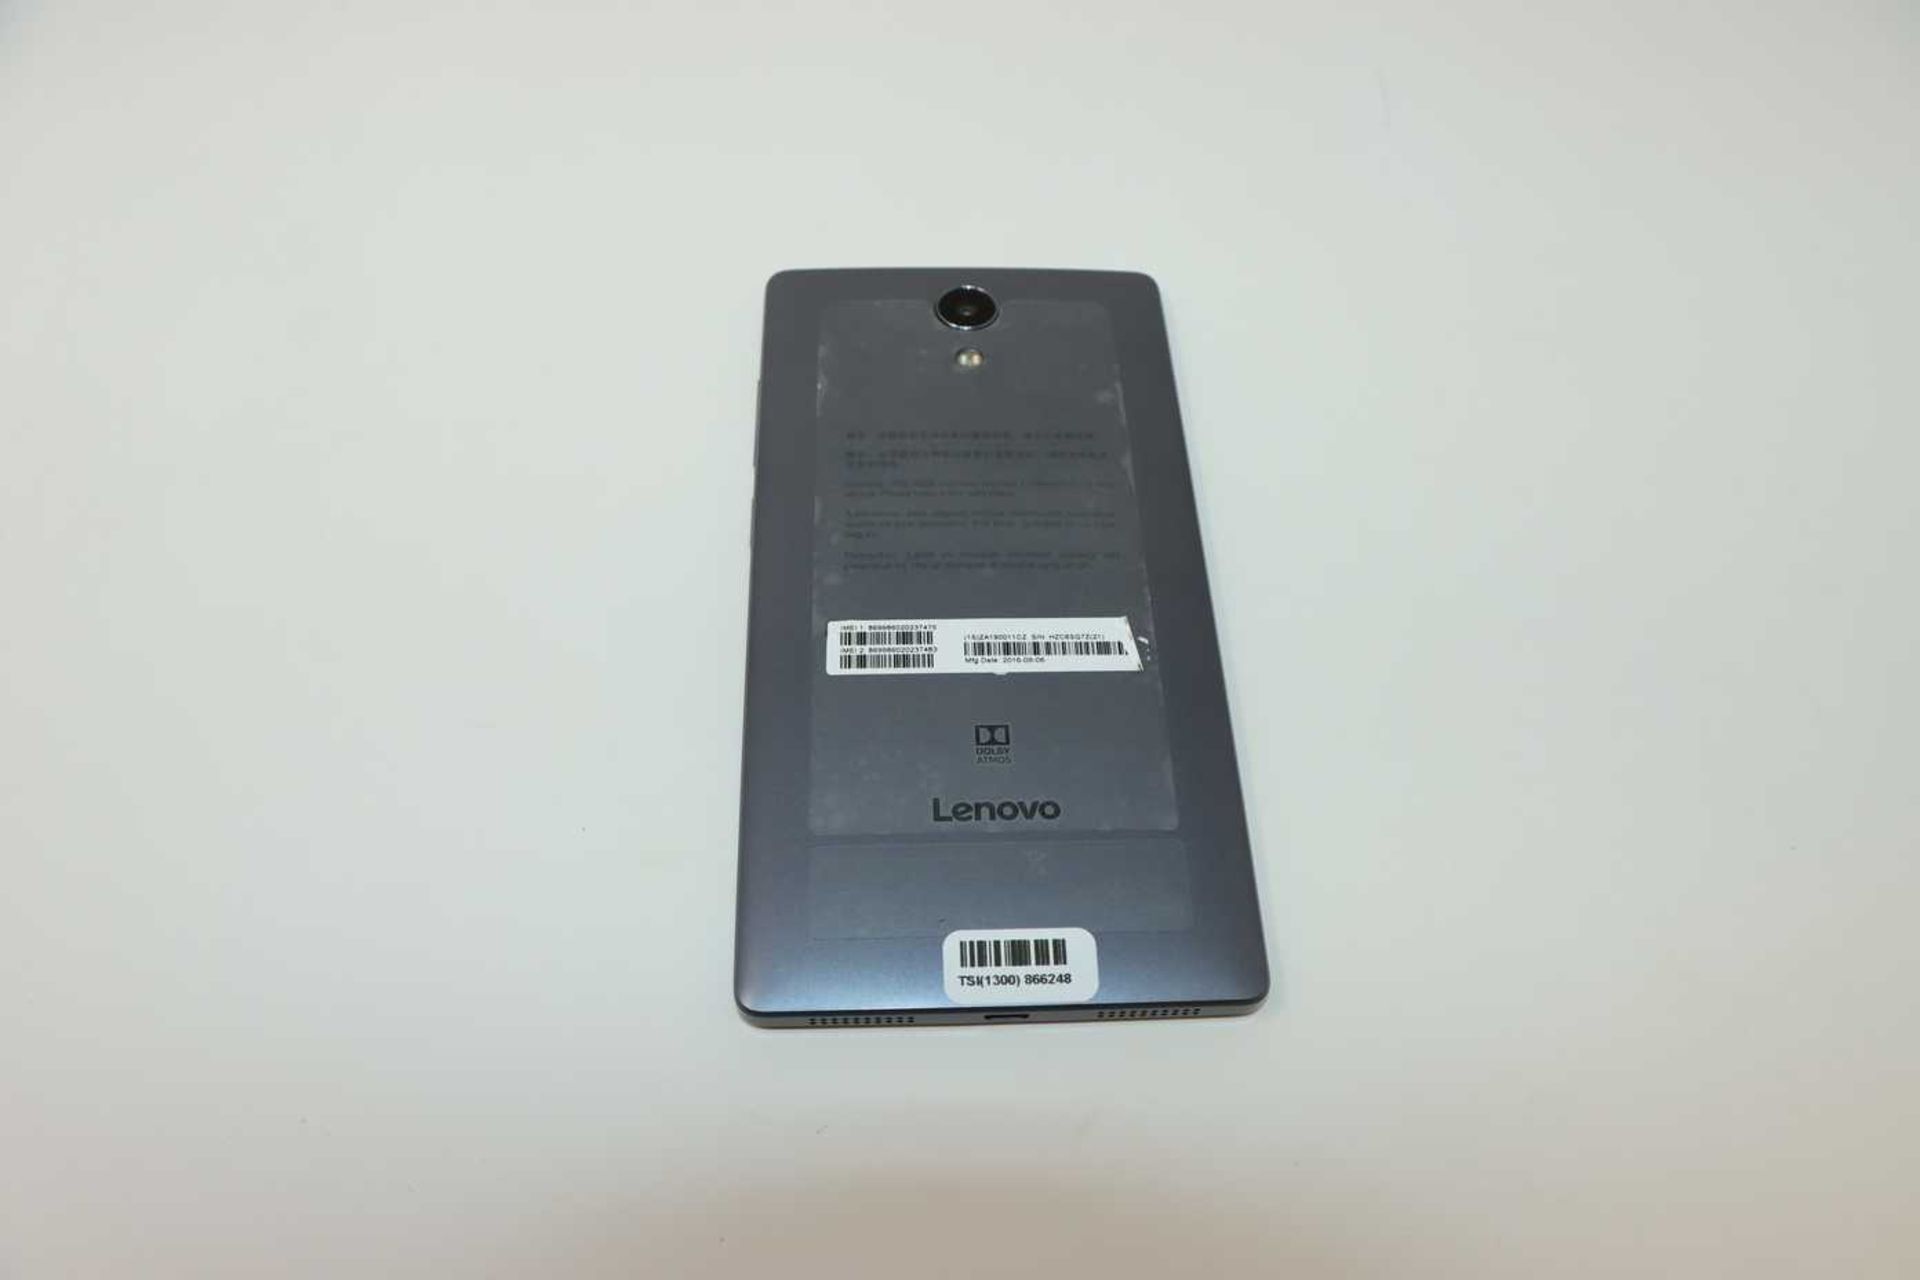 A pre-owned Lenovo PHAB 2 32GB 6.4" Smartphone in Gunmetal Grey (Unlocked, Boxed, No Charger - Image 3 of 3